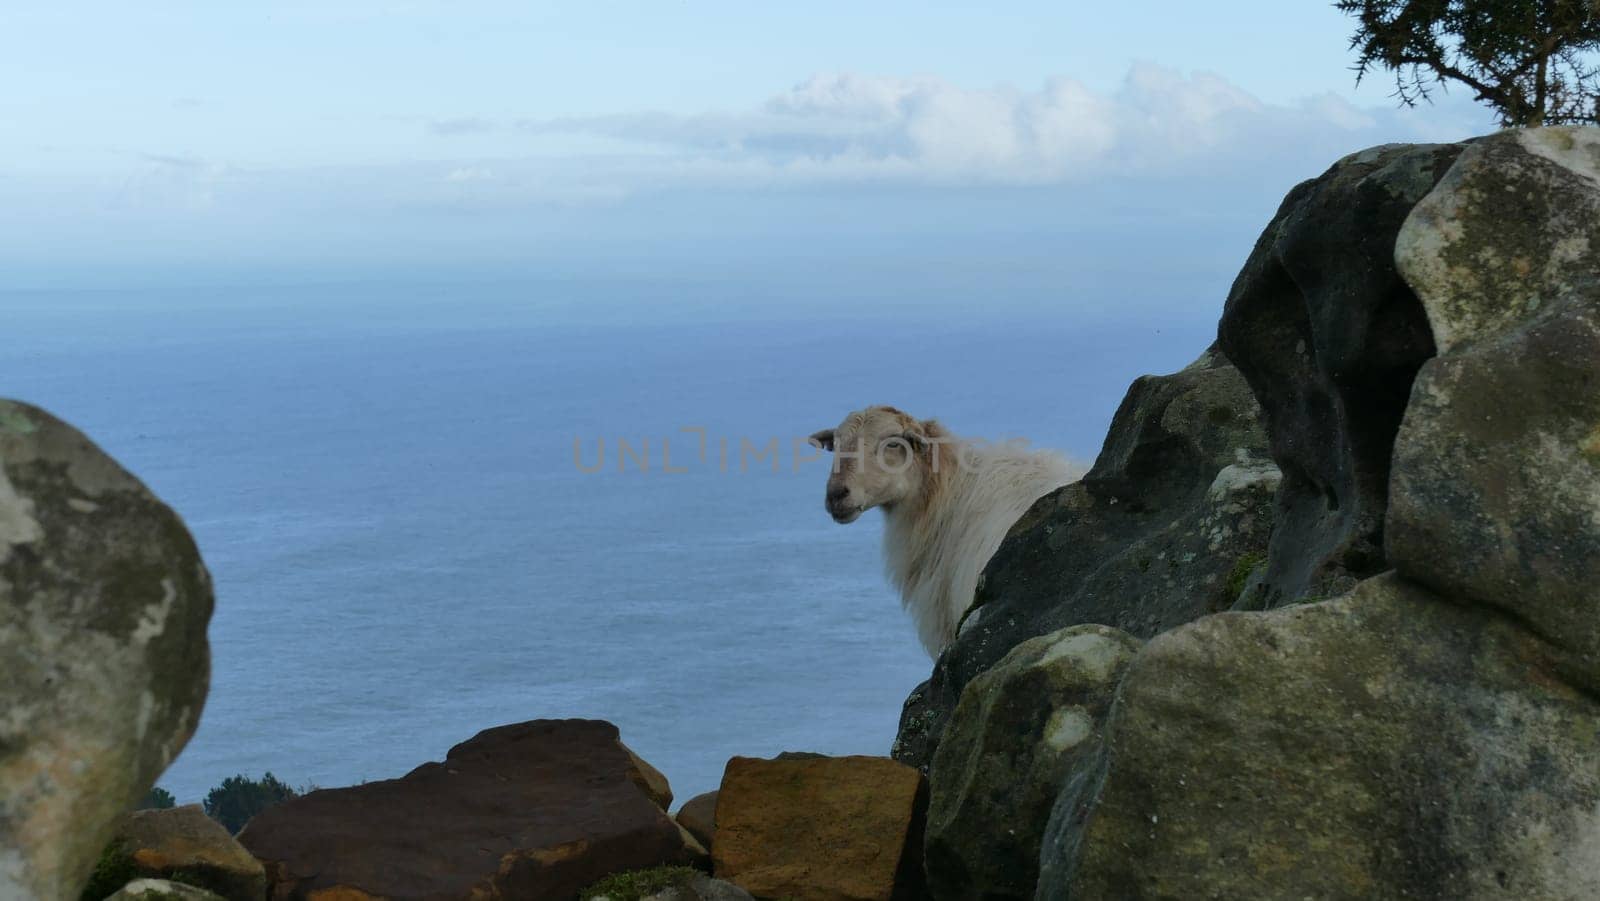 Sheep observing on top of a mountain by the sea shore